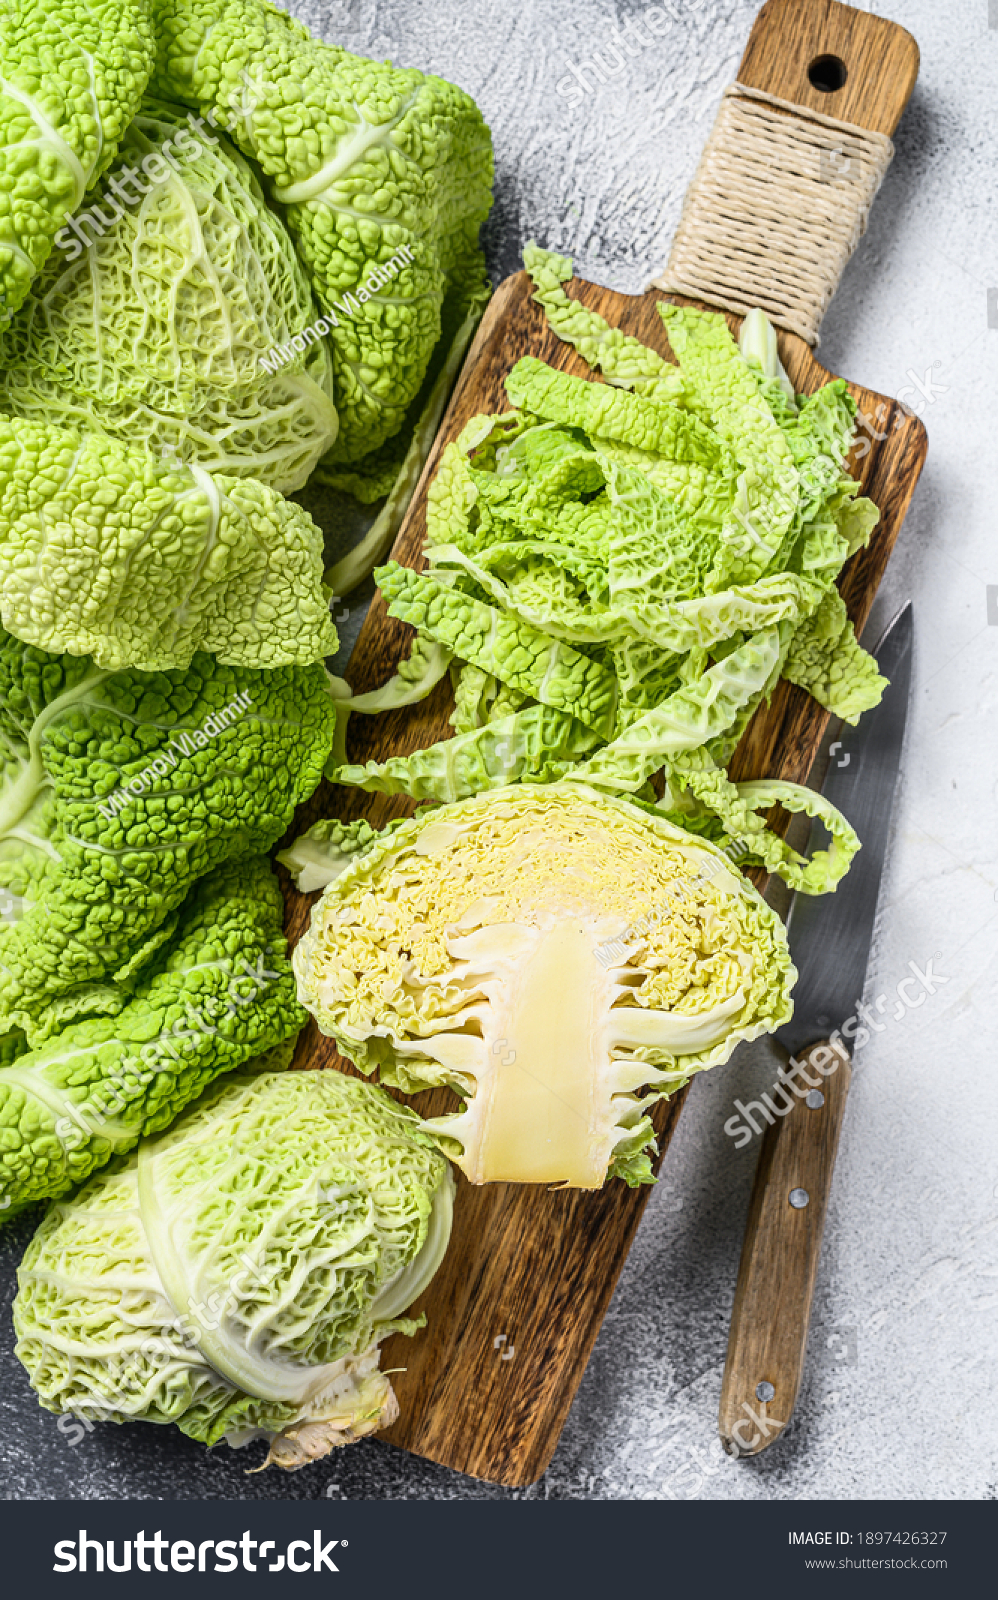 Sliced Savoy cabbage from organic grower farm. White background. Top view. #1897426327